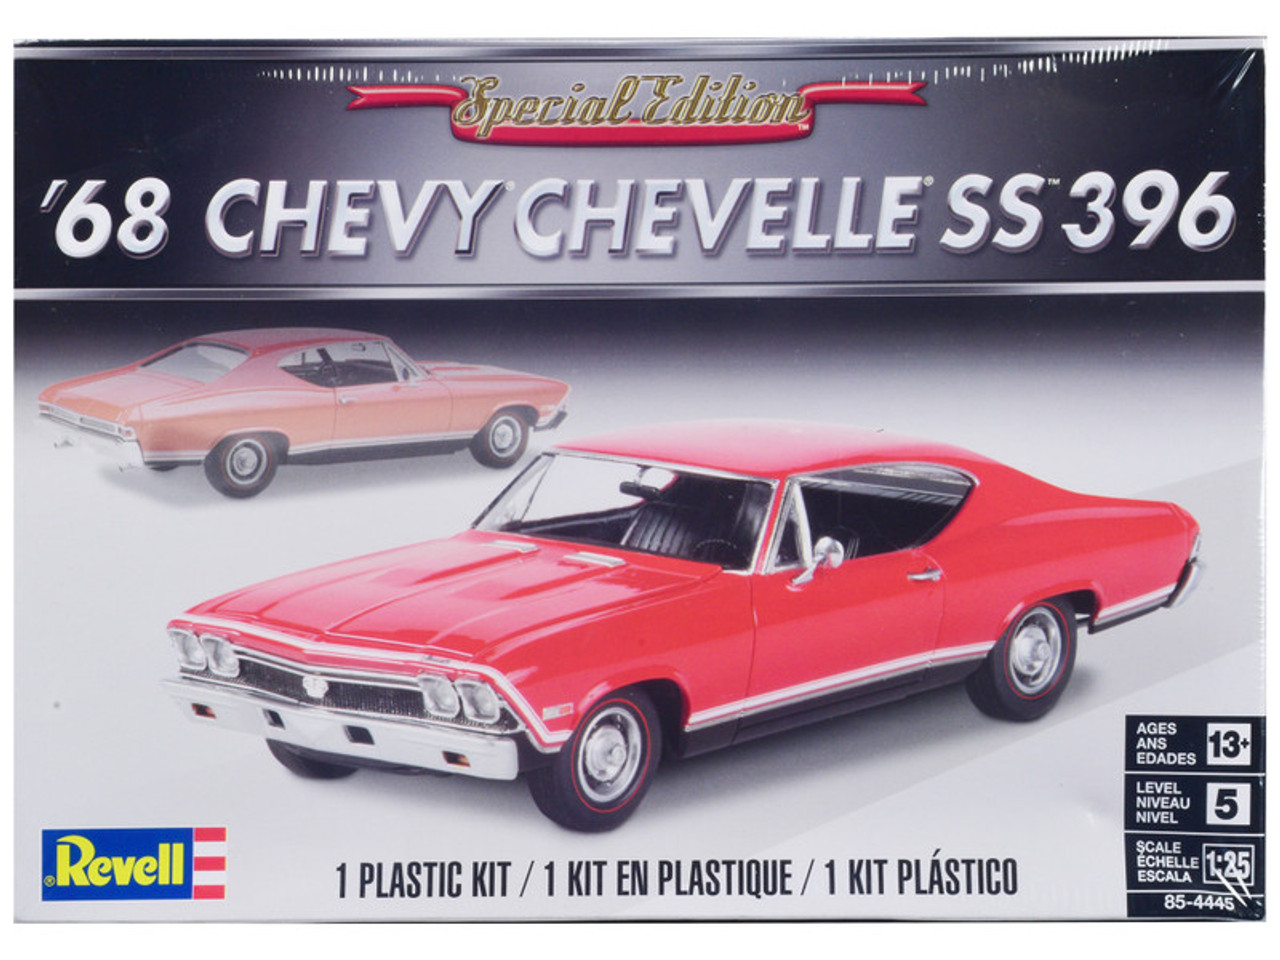 Level 5 Model Kit 1968 Chevrolet Chevelle SS 396 "Special Edition" 1/25 Scale Model by Revell